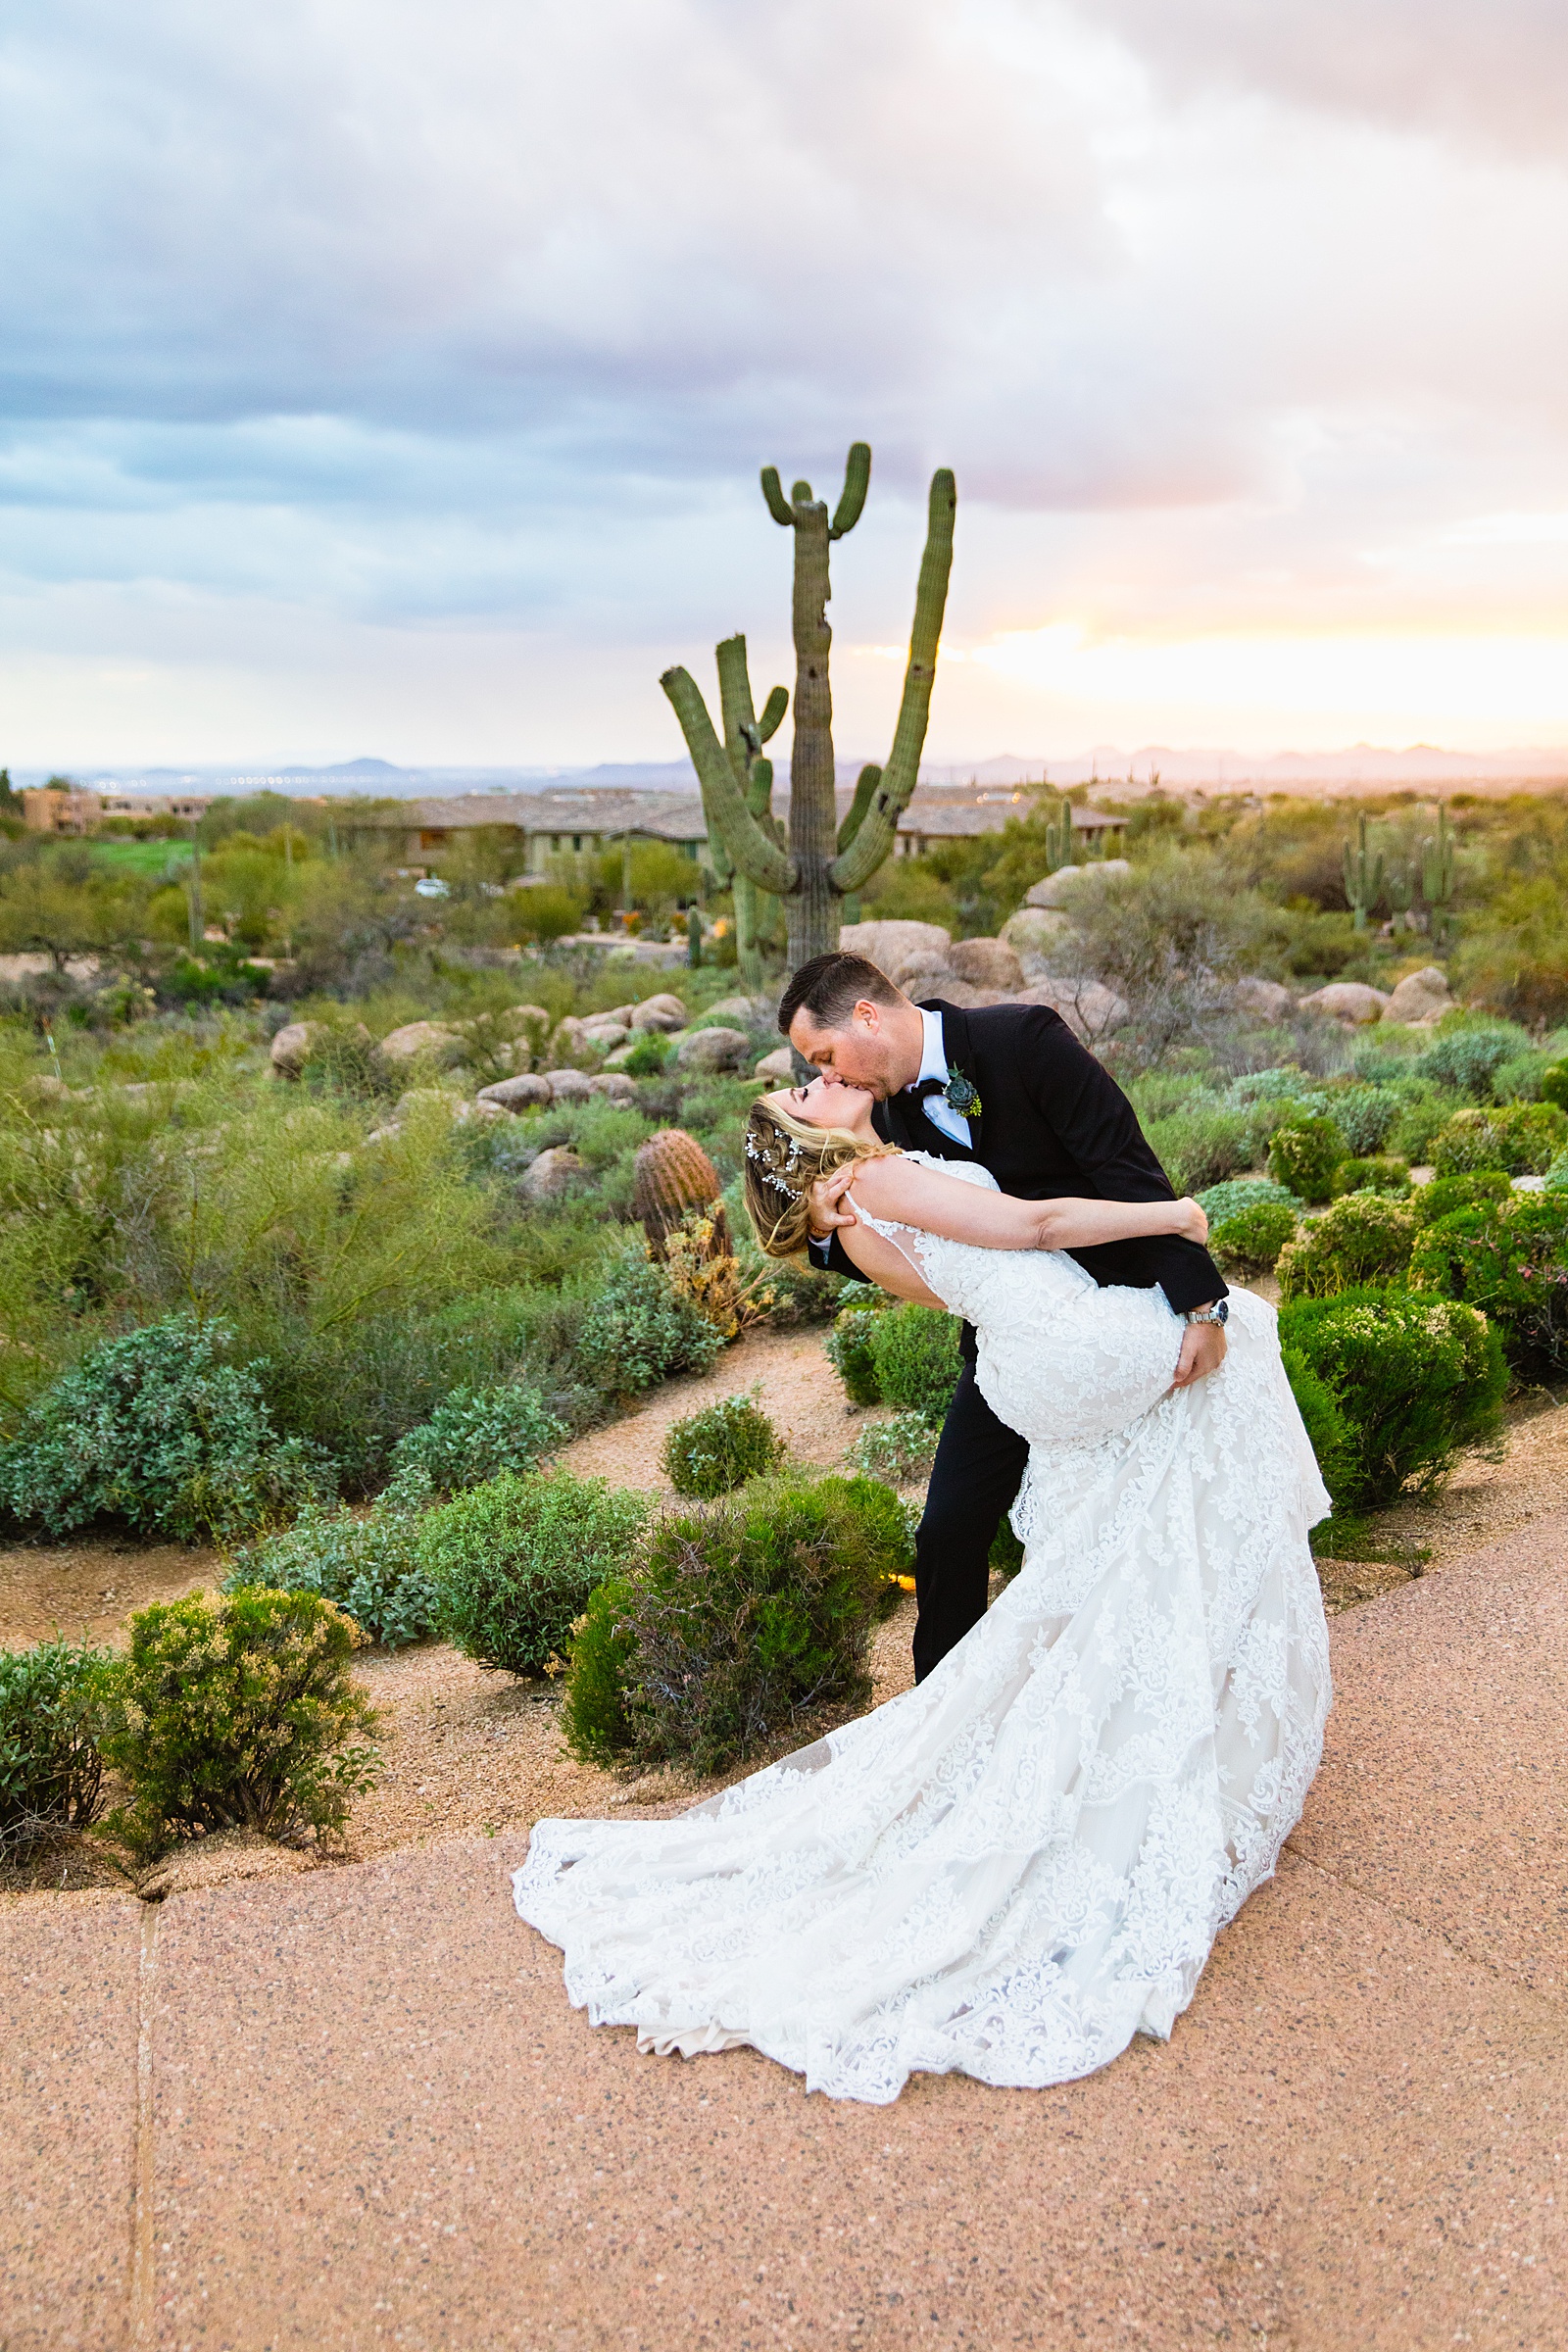 Groom dipping the bride in the desert at sunset at their Troon North wedding by Scottsdale wedding photographer PMA Photography.